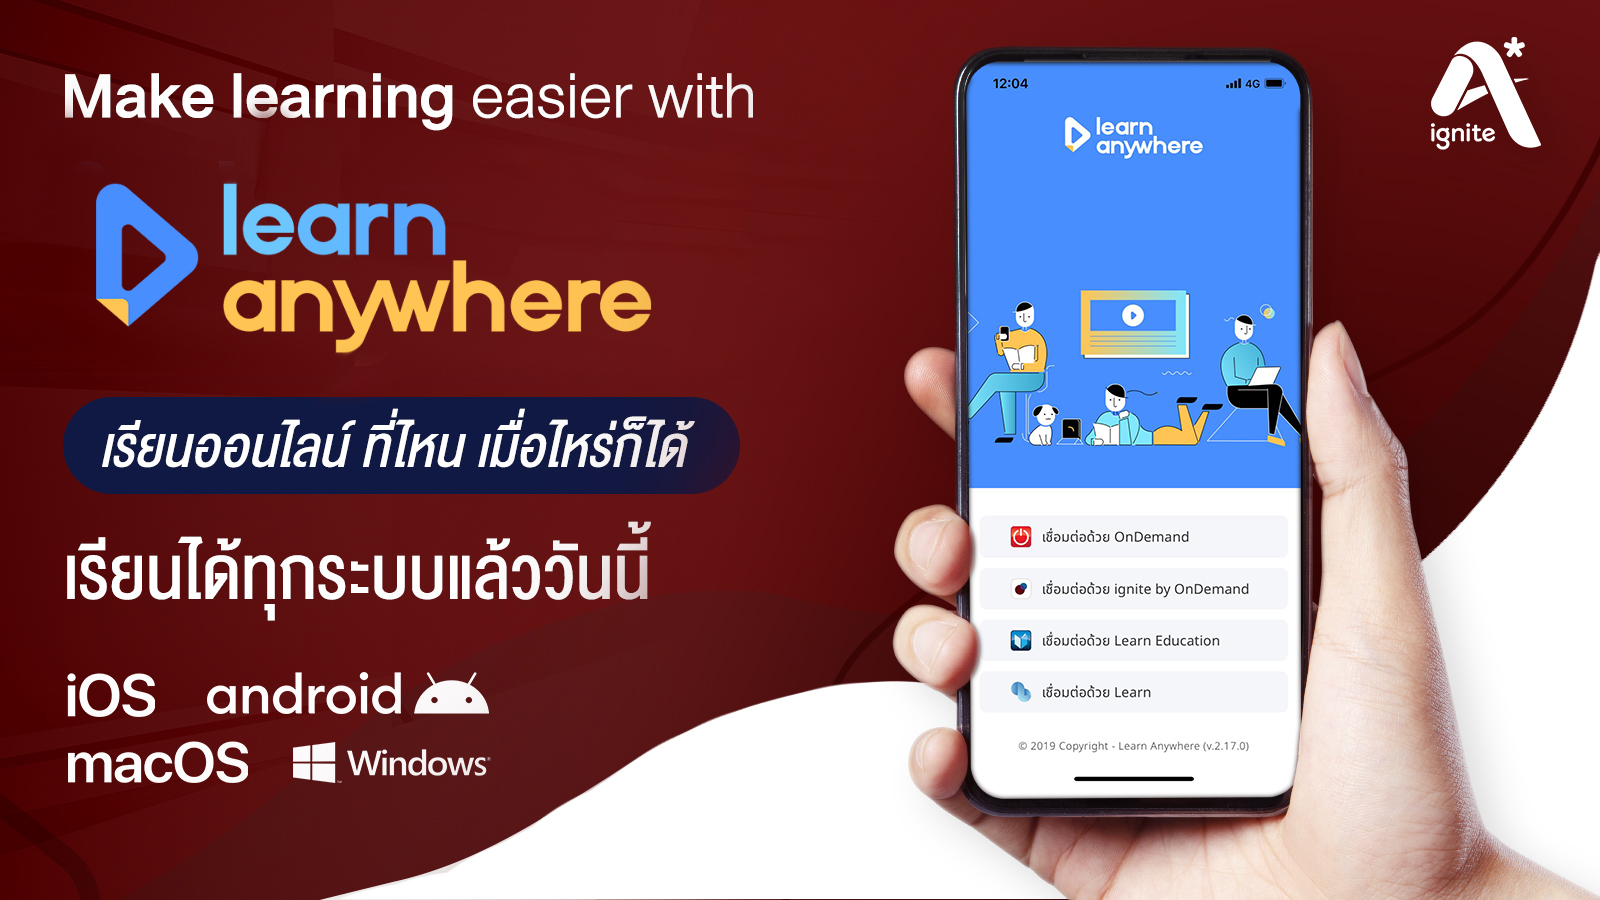 Make Learning easier with Learn Anywhere - ignite A Star - International - Banner